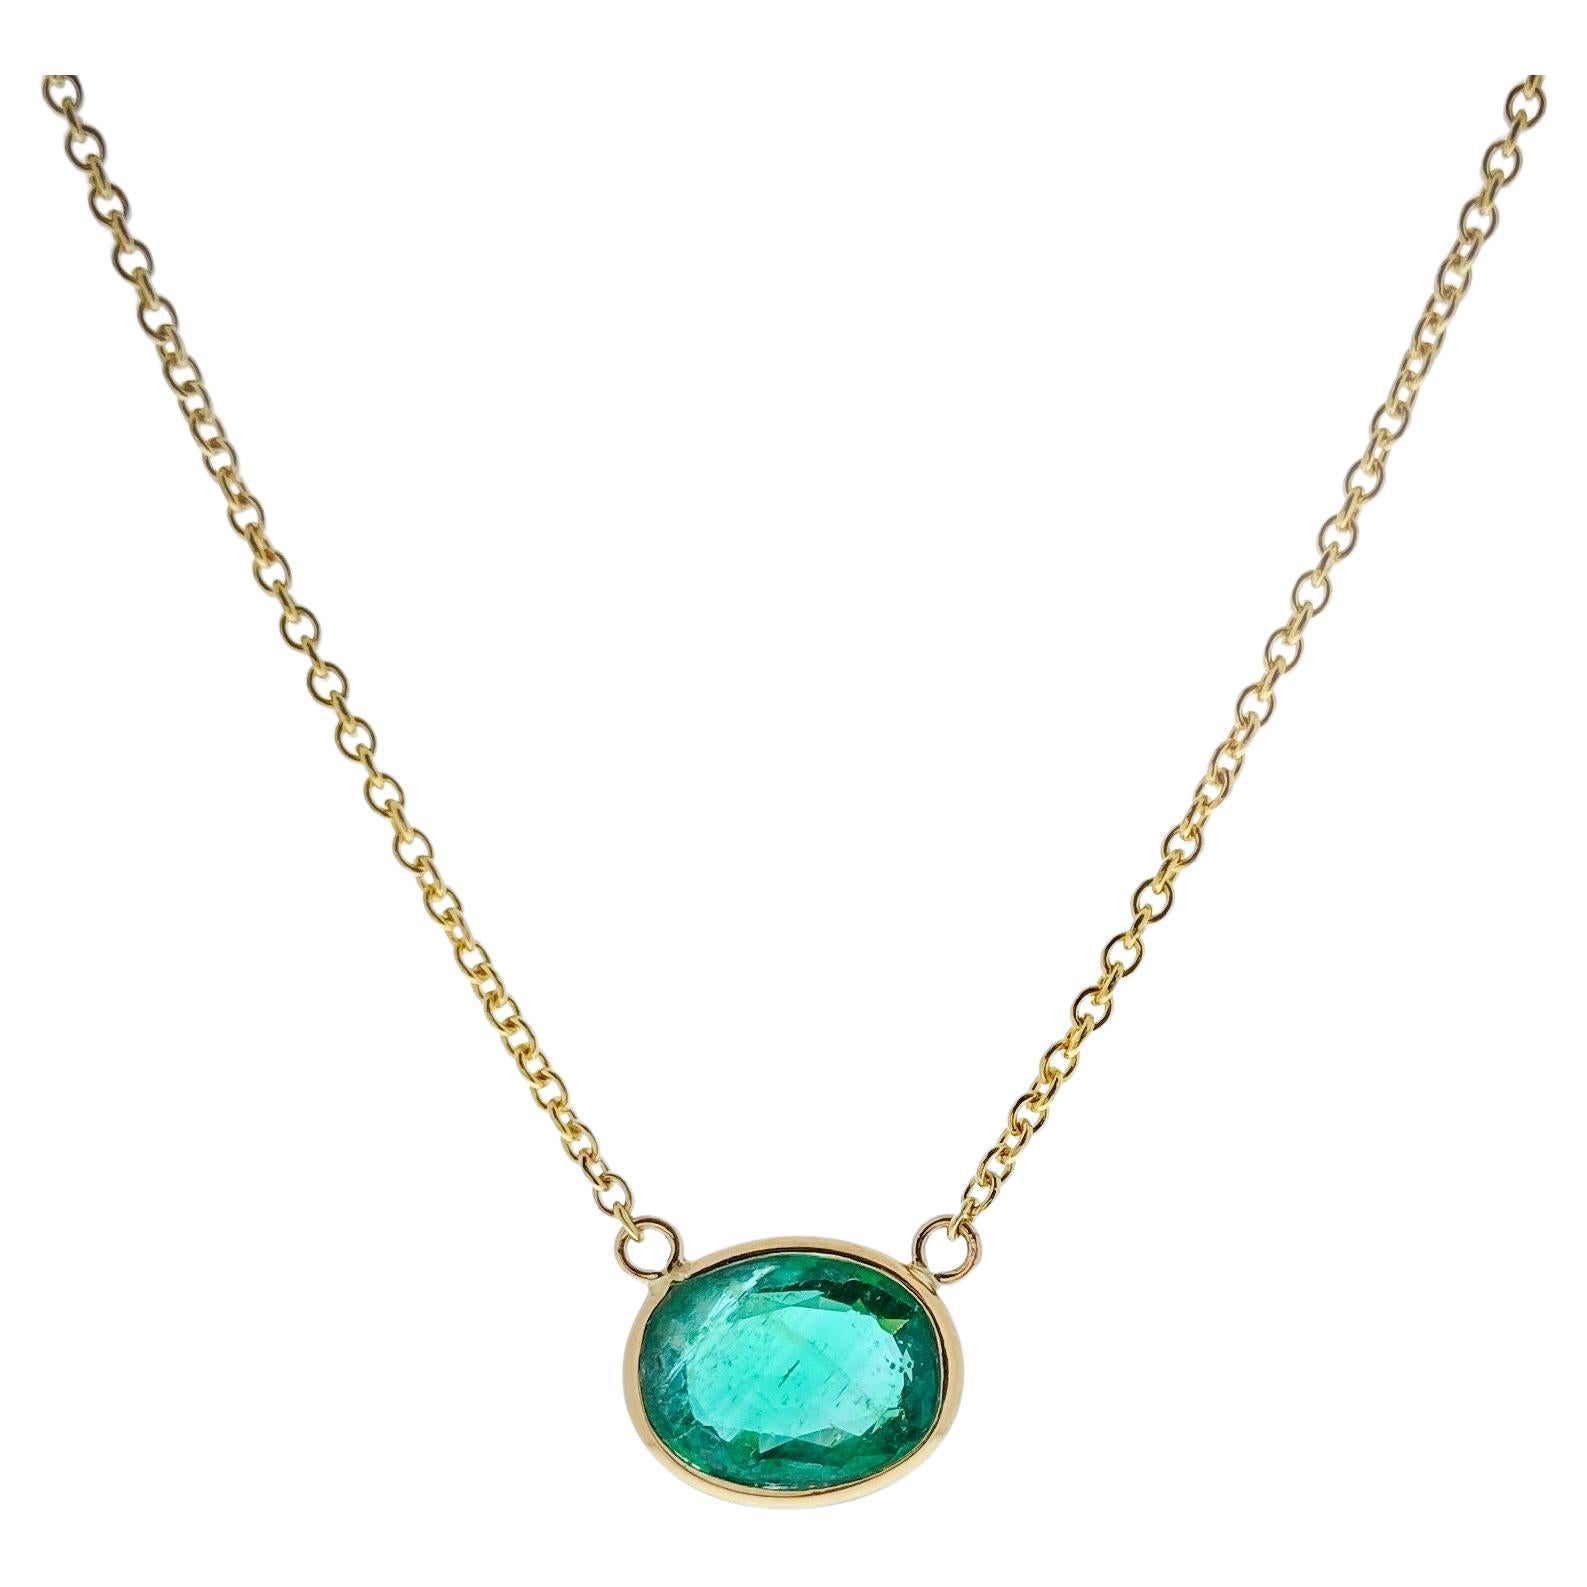 1.41 Carat Green Emerald Oval Cut Fashion Necklaces In 14K Yellow Gold For Sale